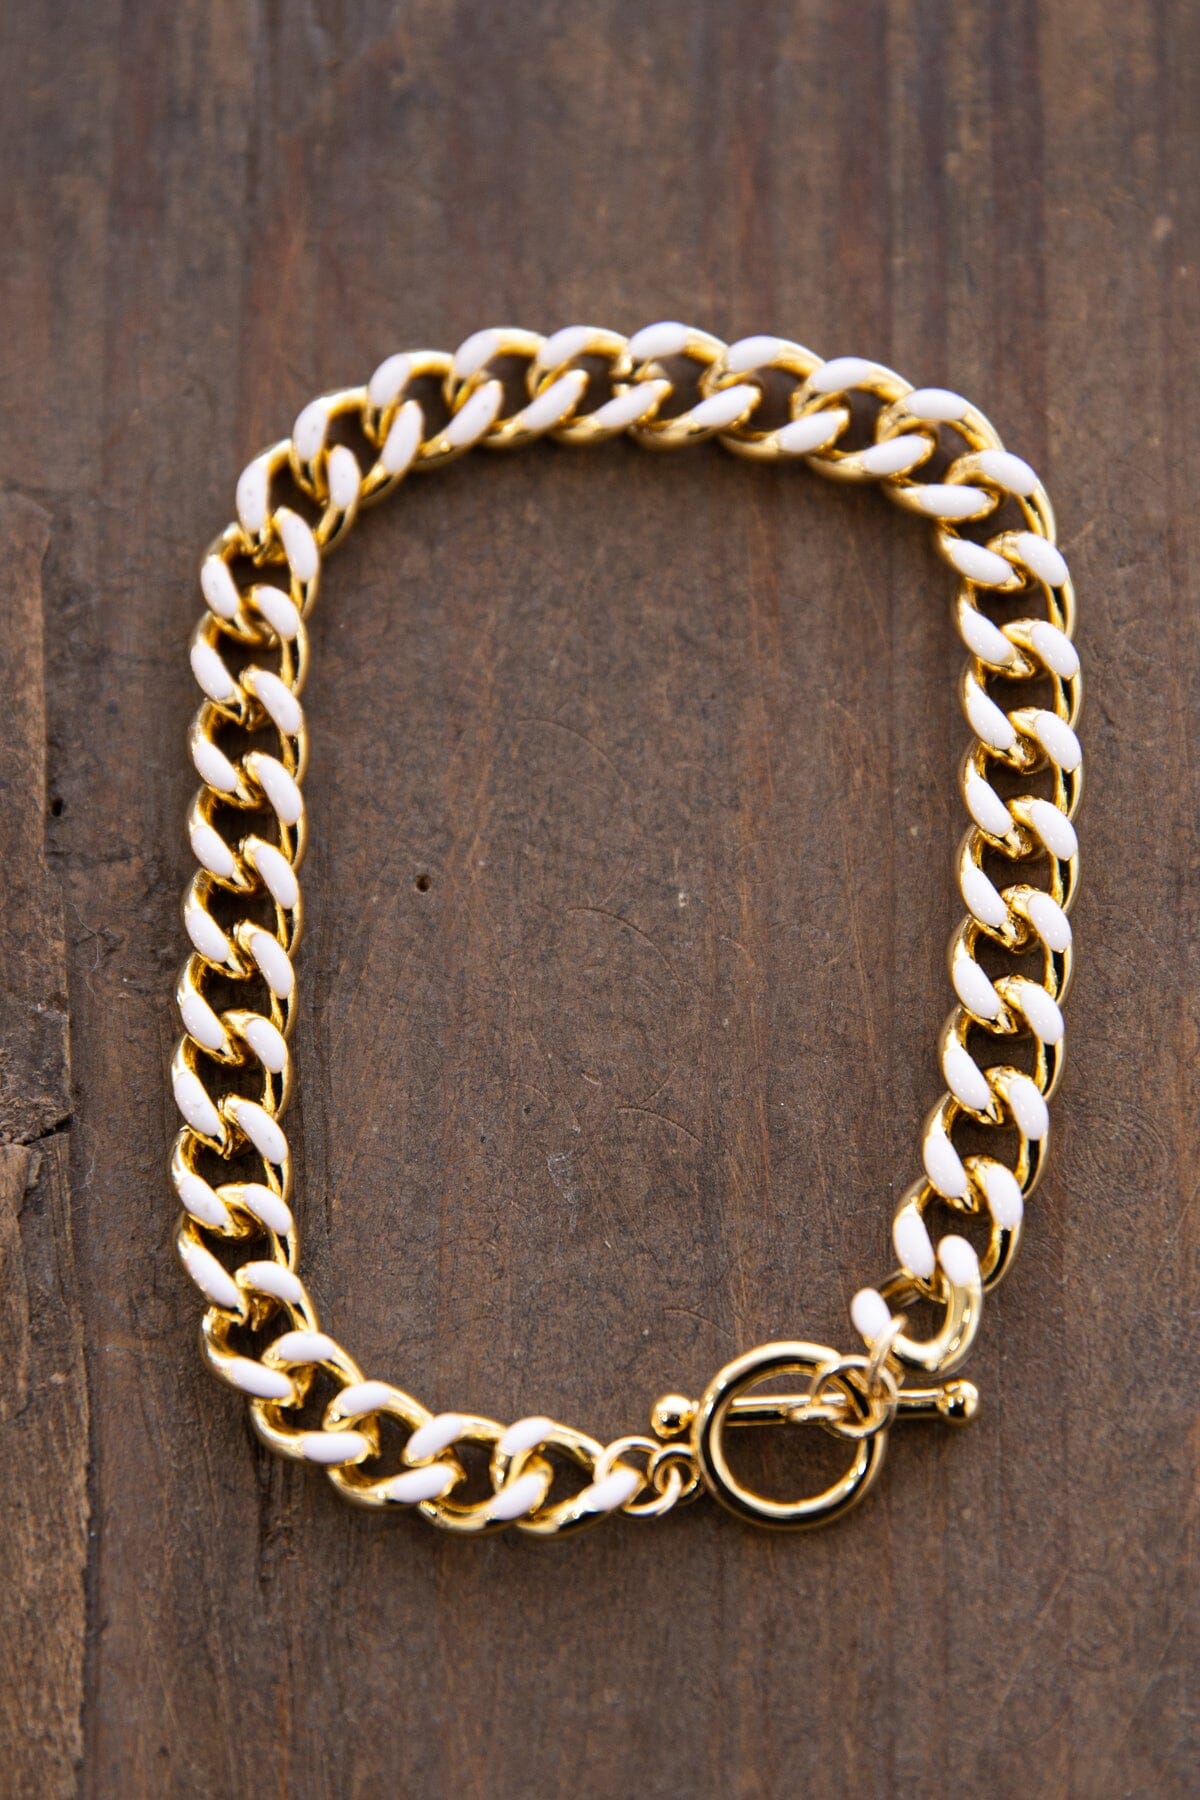 Gold and White Enamel Chain Bracelet - Filly Flair